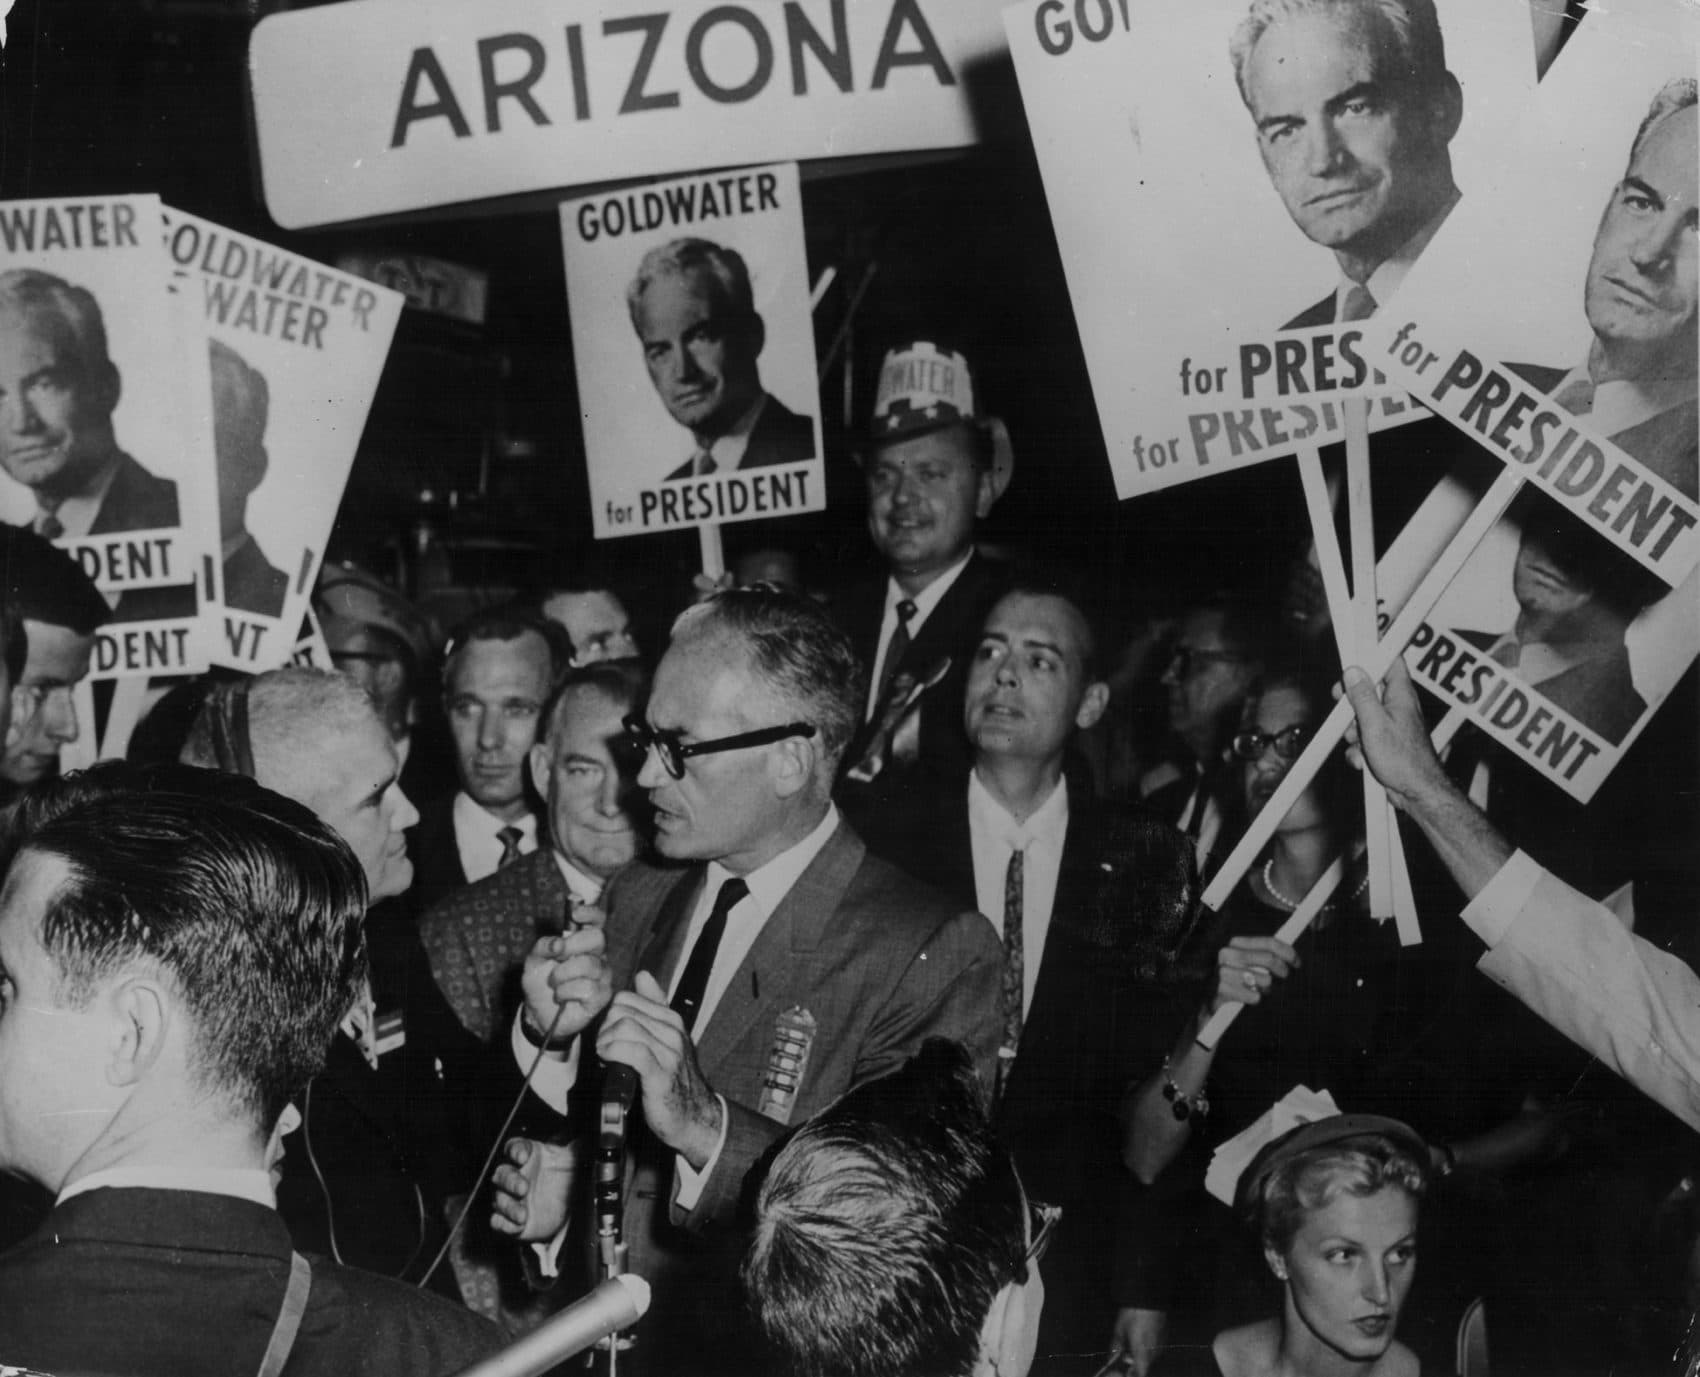 Senator Barry Goldwater, surrounded by his supporters as he campaigns for the Republican candidacy, 1952. (Keystone/Hulton Archive/Getty Images)